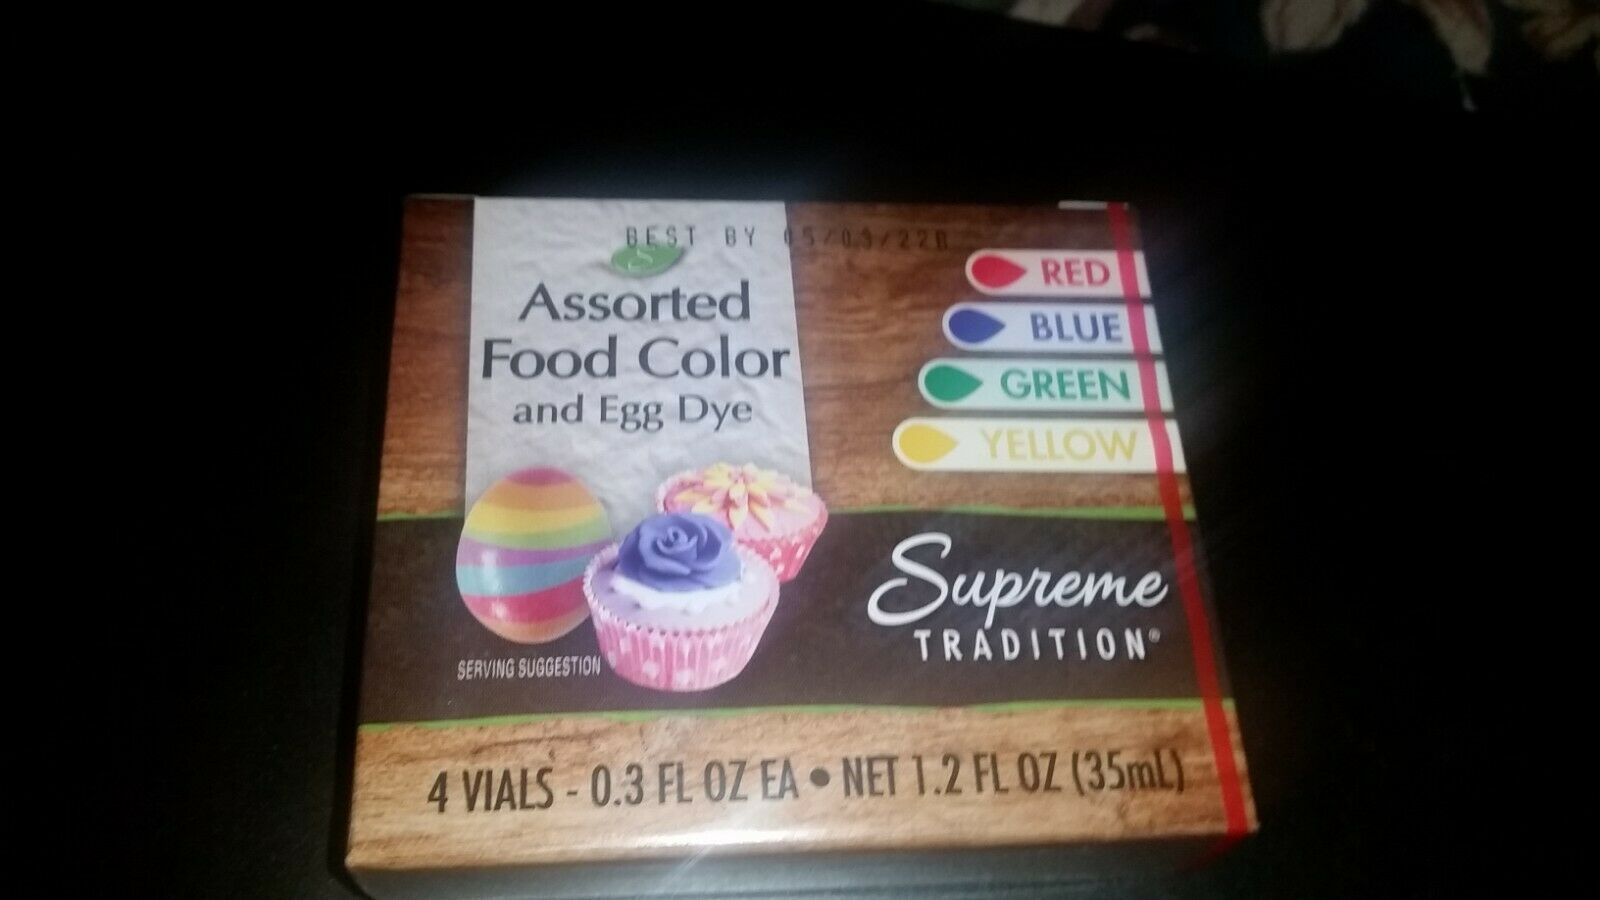 Supreme Tradition Food color &egg dye 4 vials .3oz each-red, blue, green, yellow - $6.00